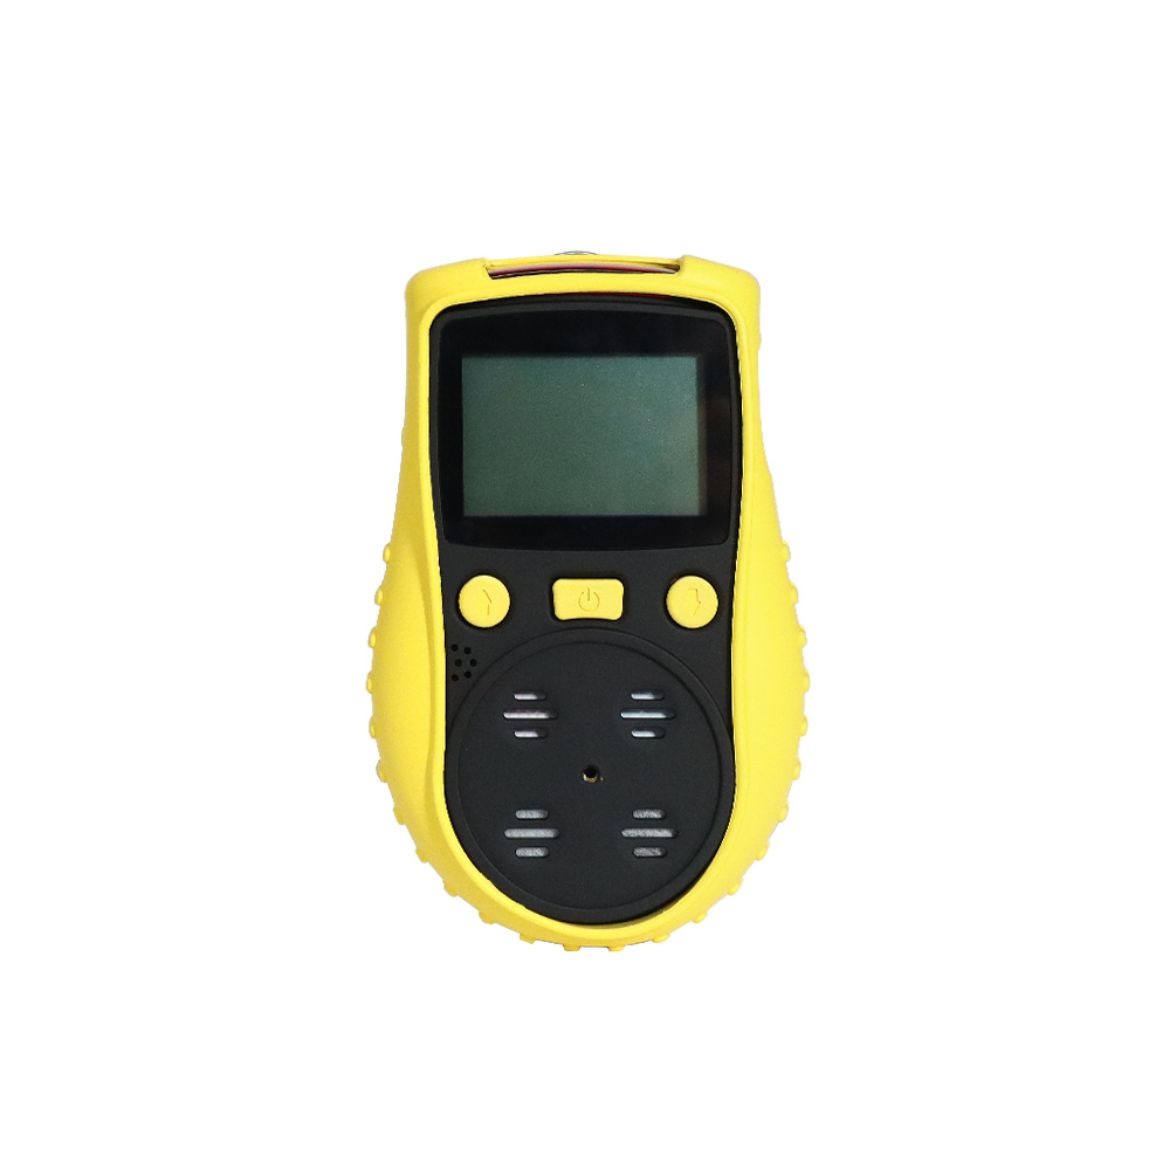 Handheld 4 in 1 Multi Gas Detector, CO, H2S, O2, EX